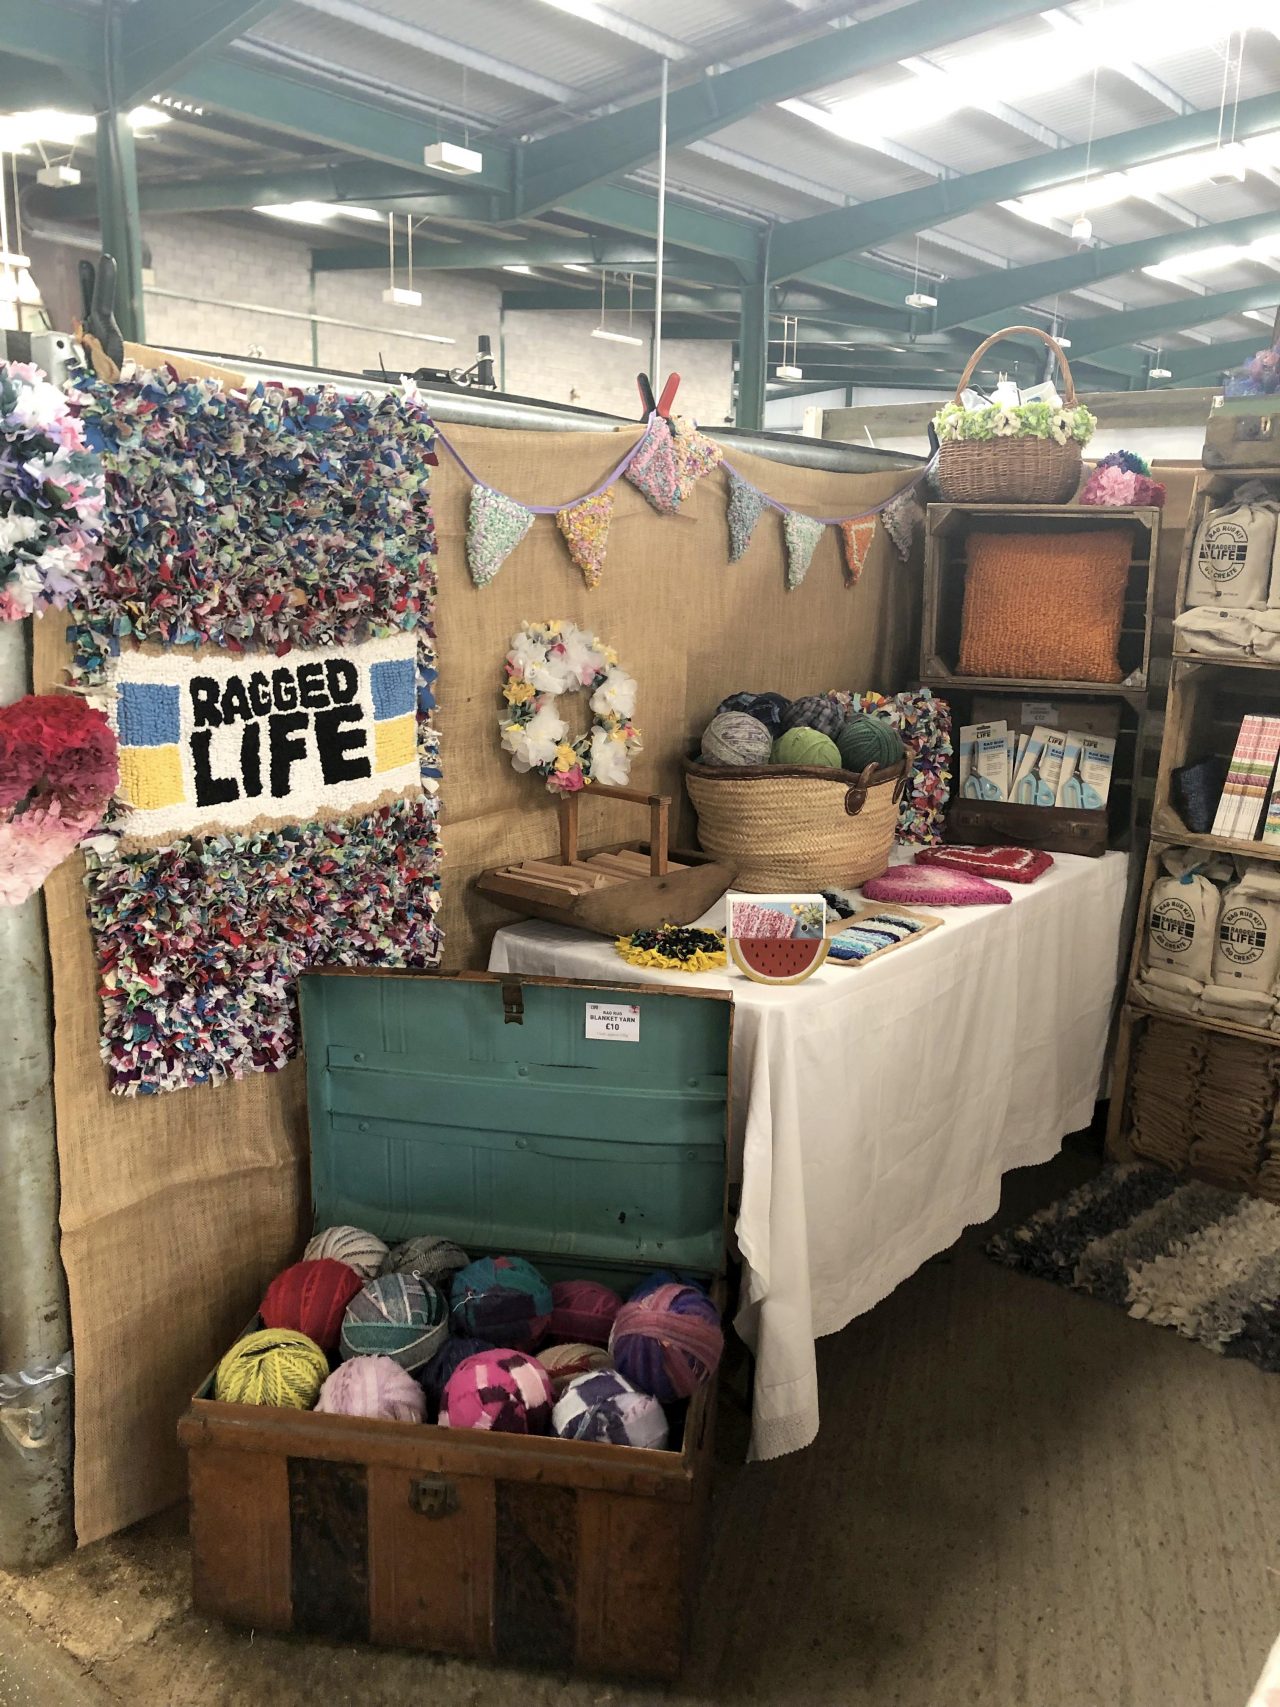 Ragged Life rag rug stand at Woolfest 2019 in Cockermouth, Cumbria festival